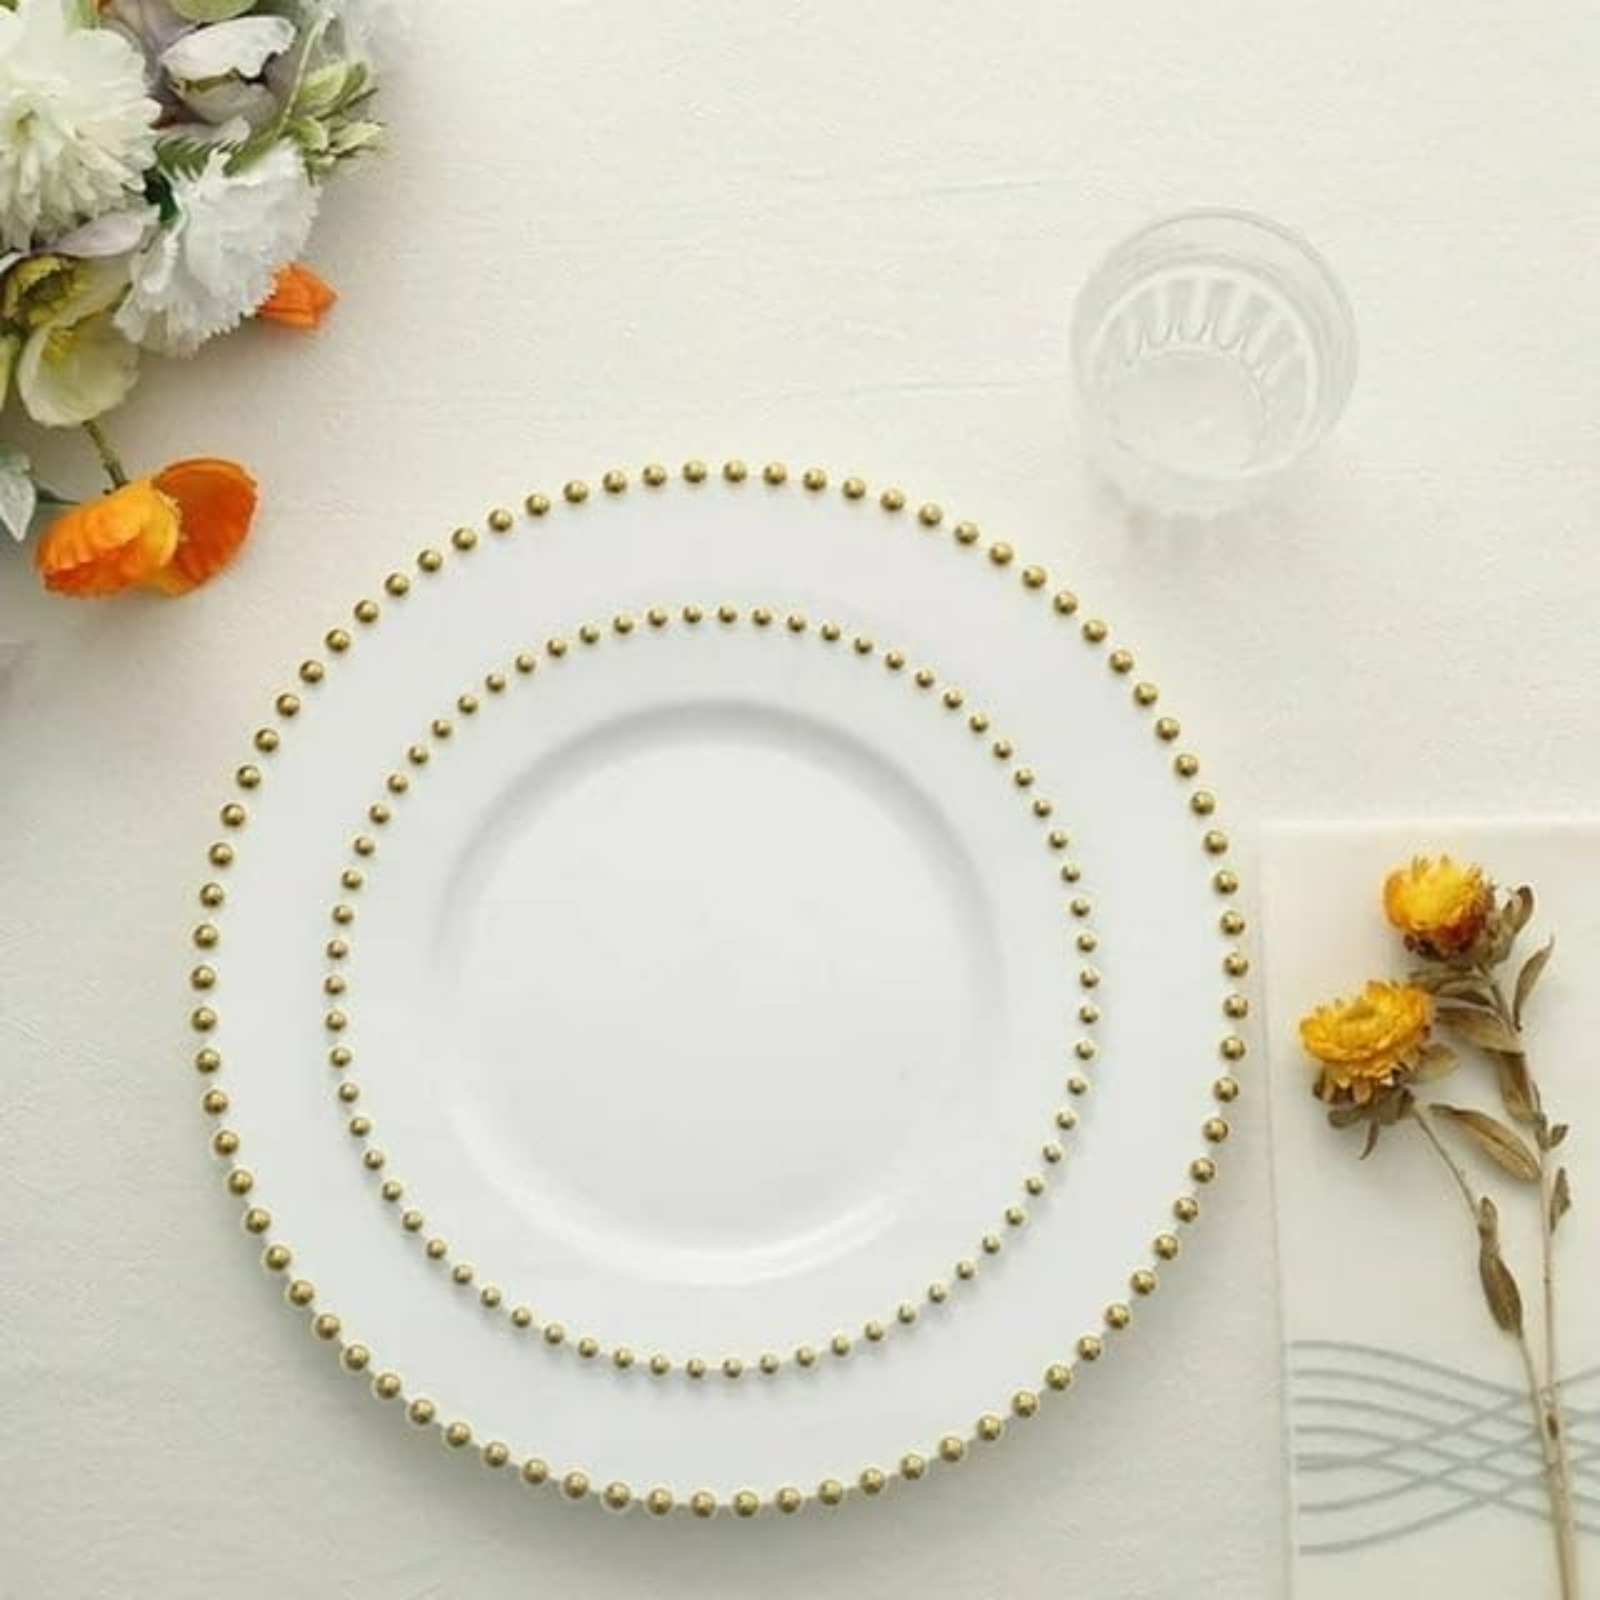 White & Gold Beaded EXTRA HEAVY Weight 7.5" Plastic Diner Plates  Decorline   